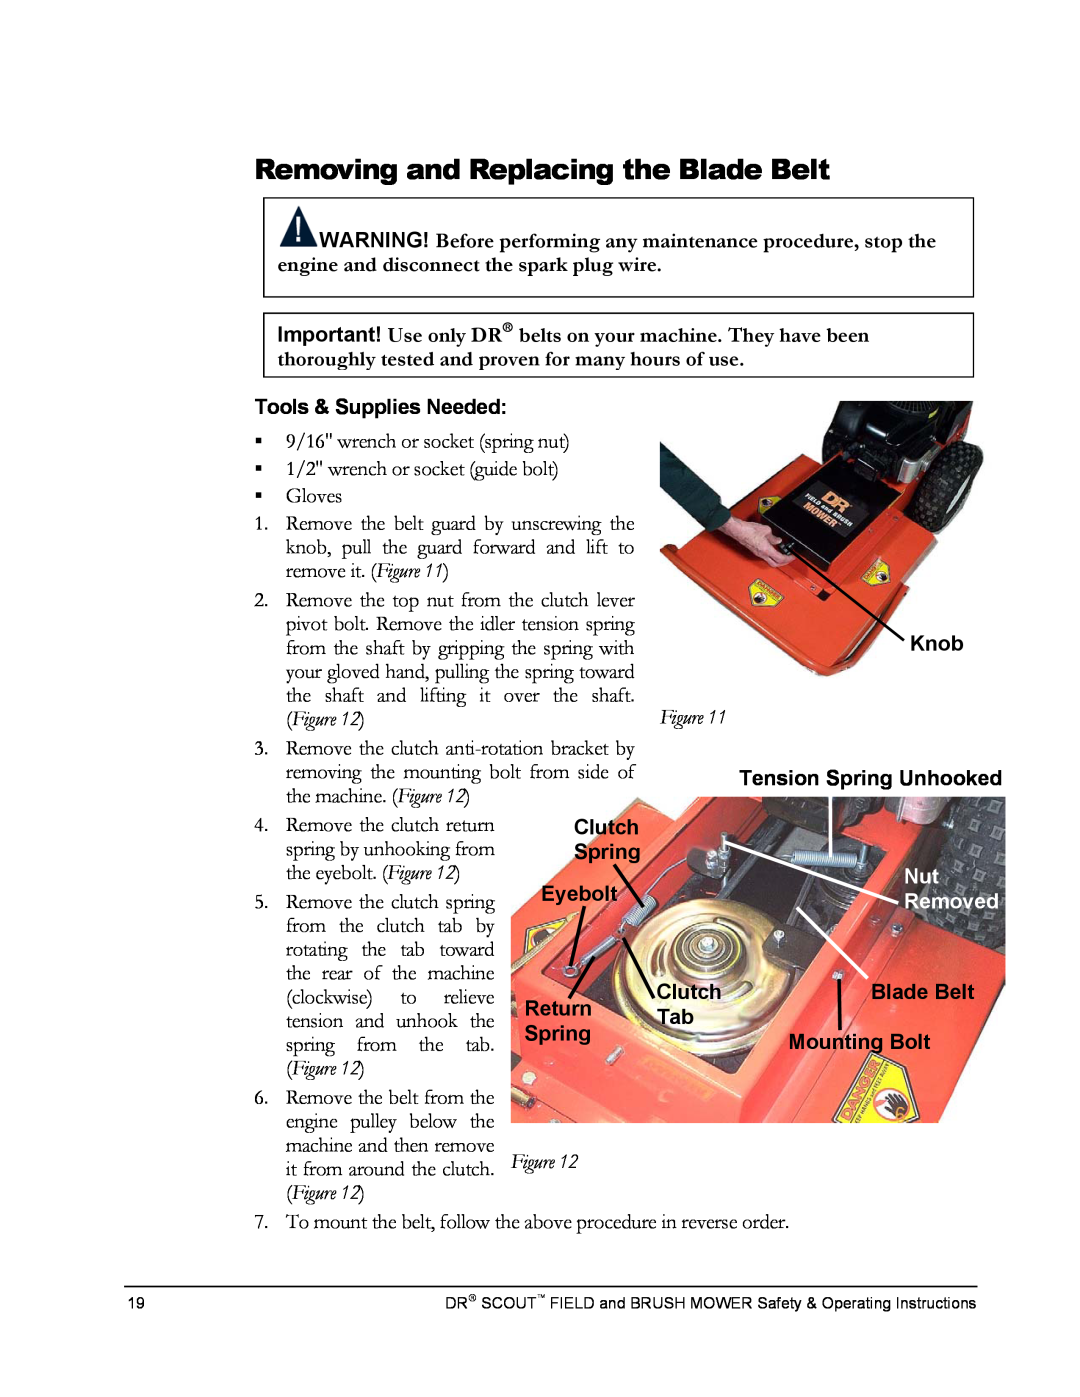 Country Home Products DR SCOUT FIELD and BRUSH MOWER manual Removing and Replacing the Blade Belt 